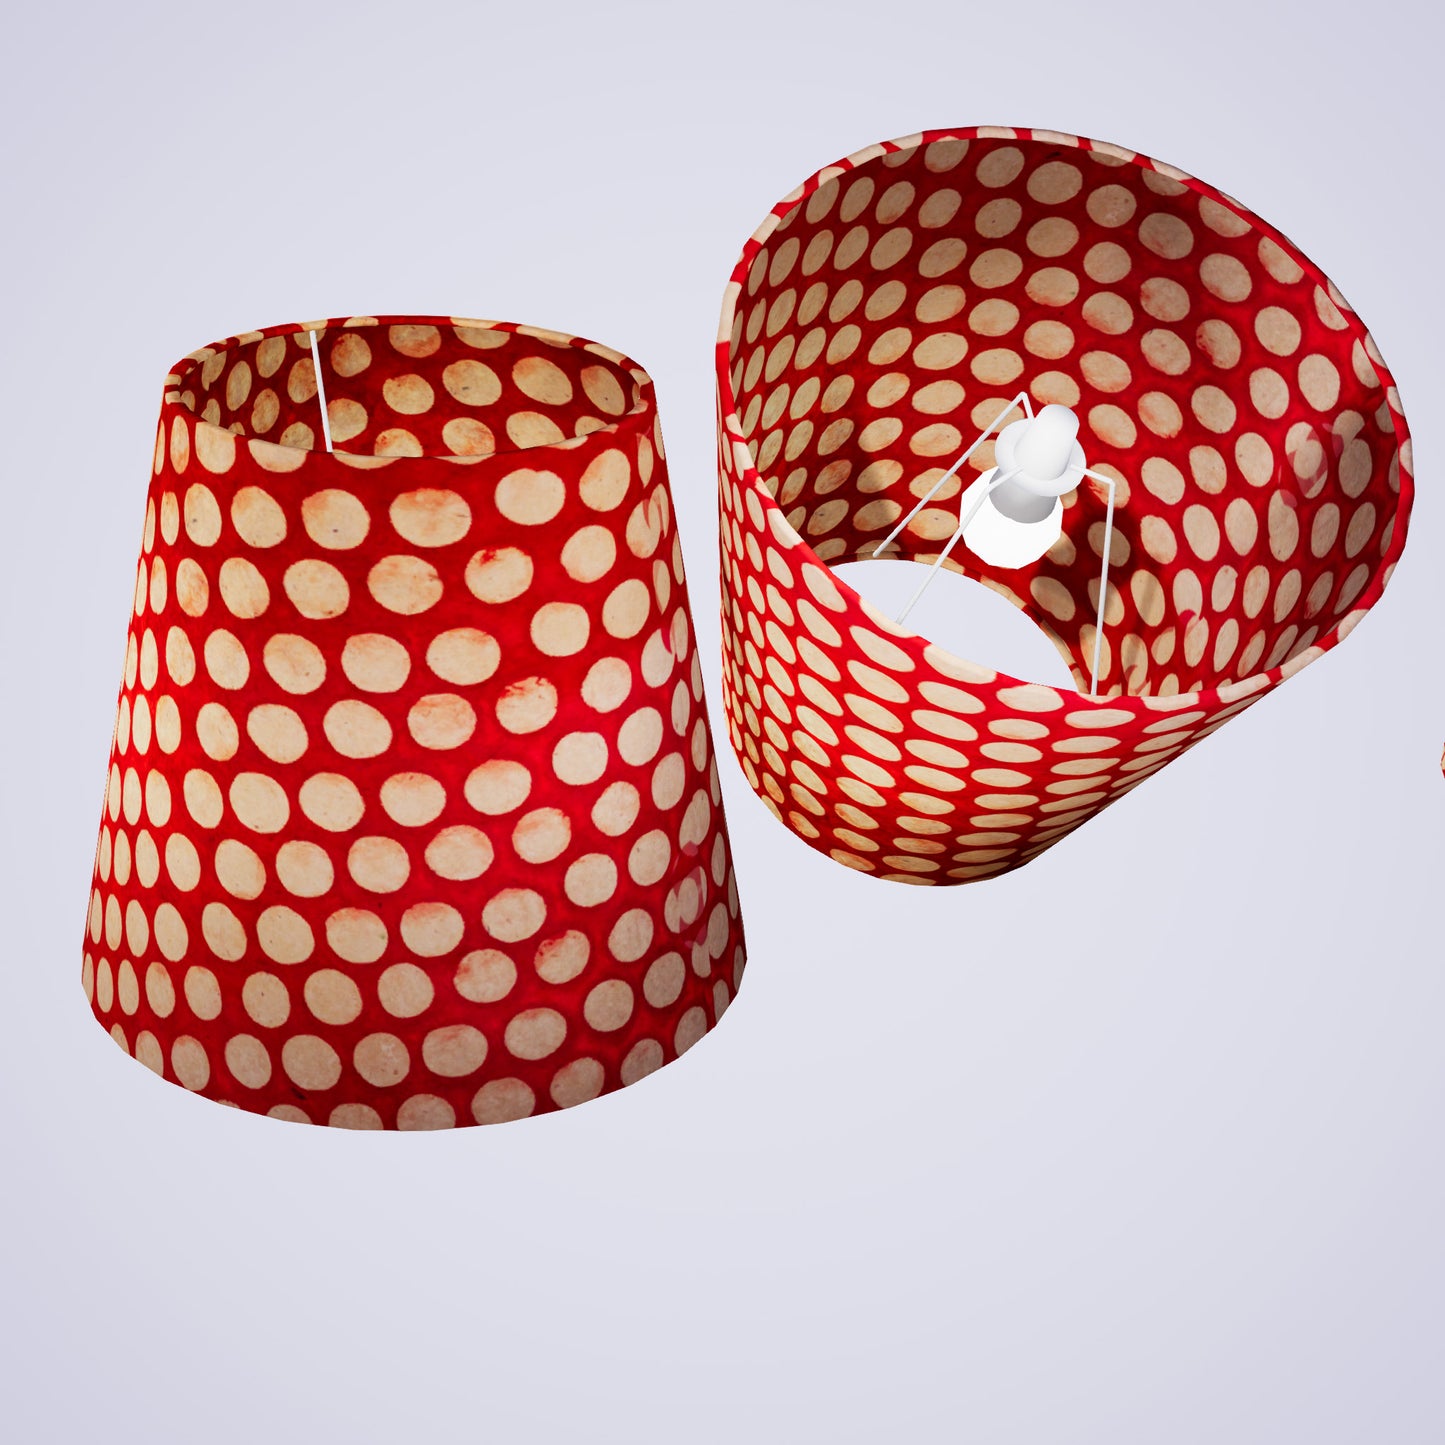 Conical Lamp Shade P84 - Batik Dots on Red, 23cm(top) x 35cm(bottom) x 31cm(height)